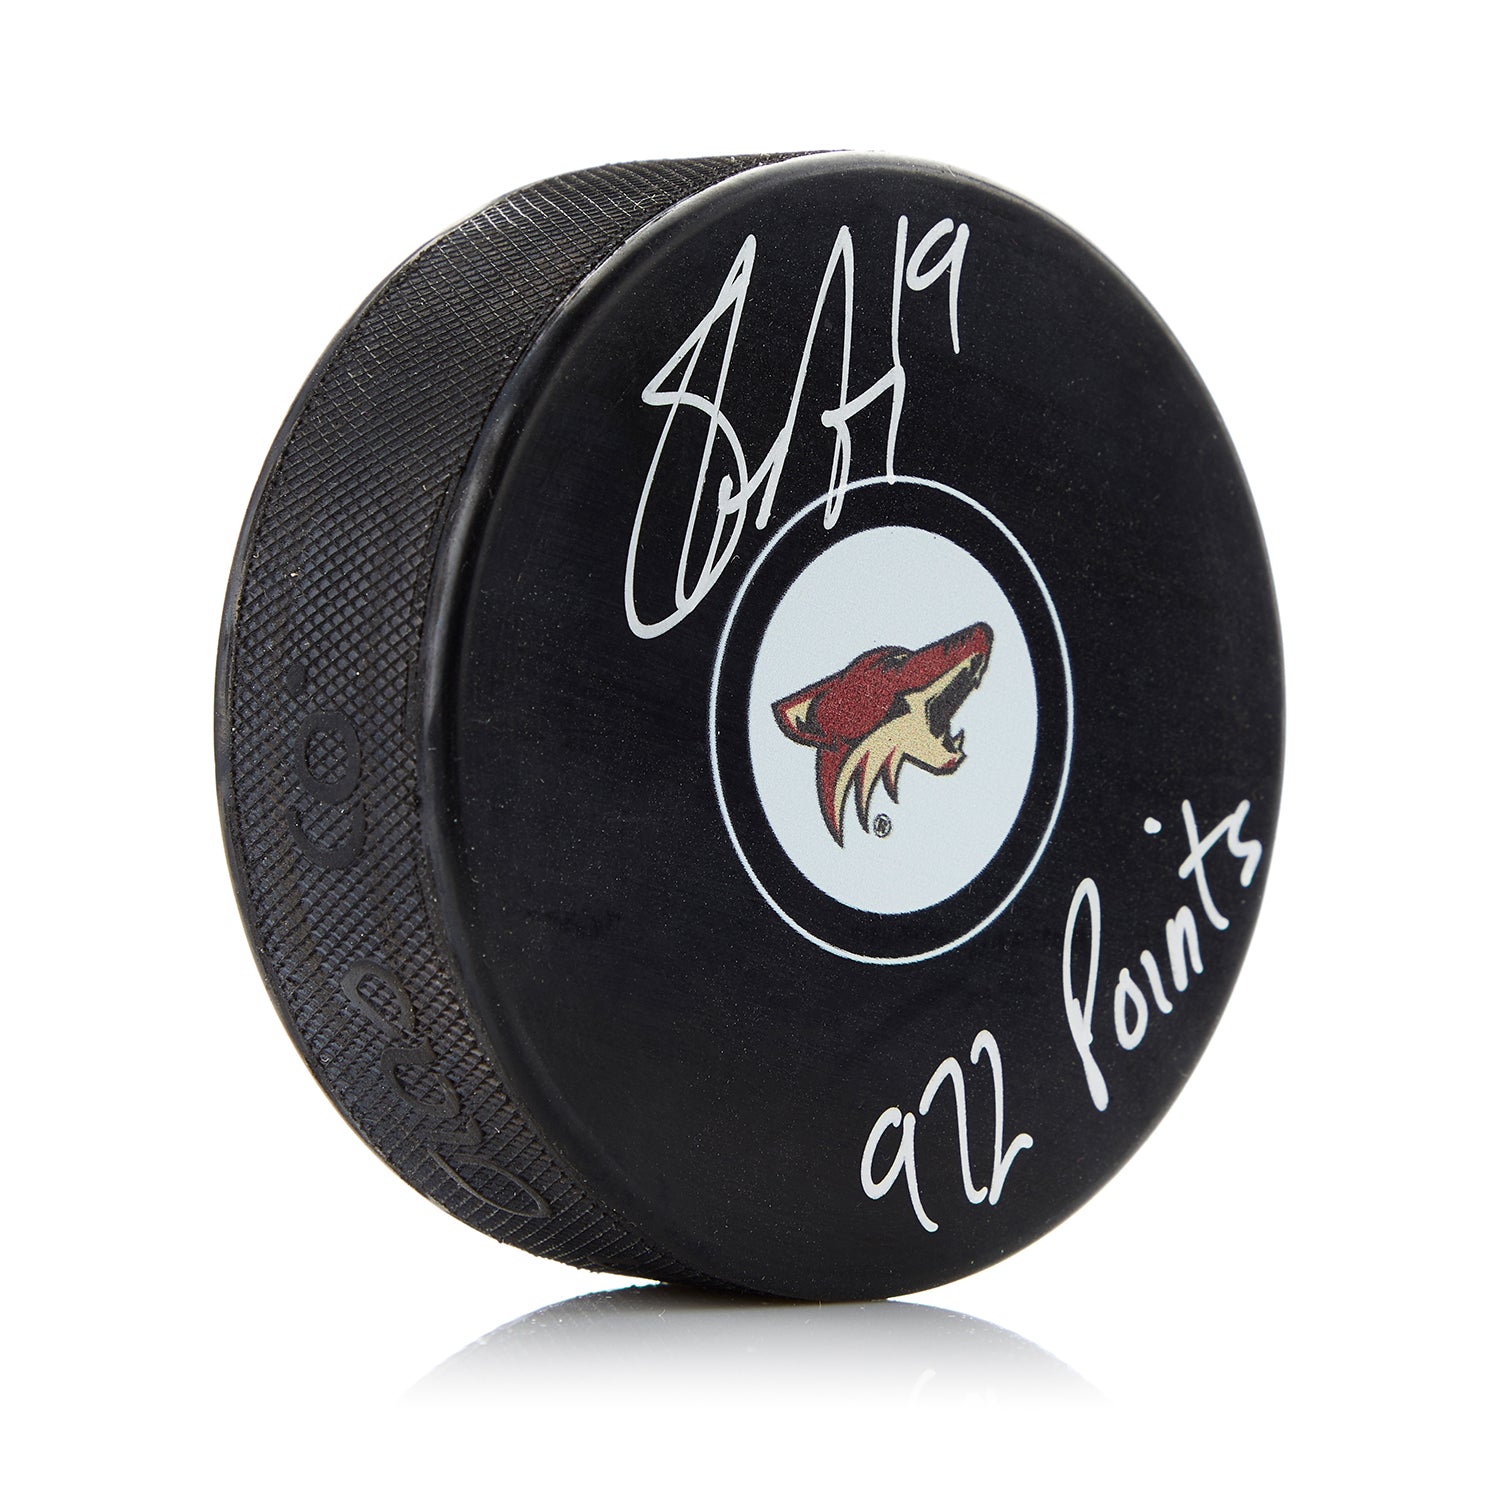 Shane Doan Arizona Coyotes Autographed Puck with 972 Points Note